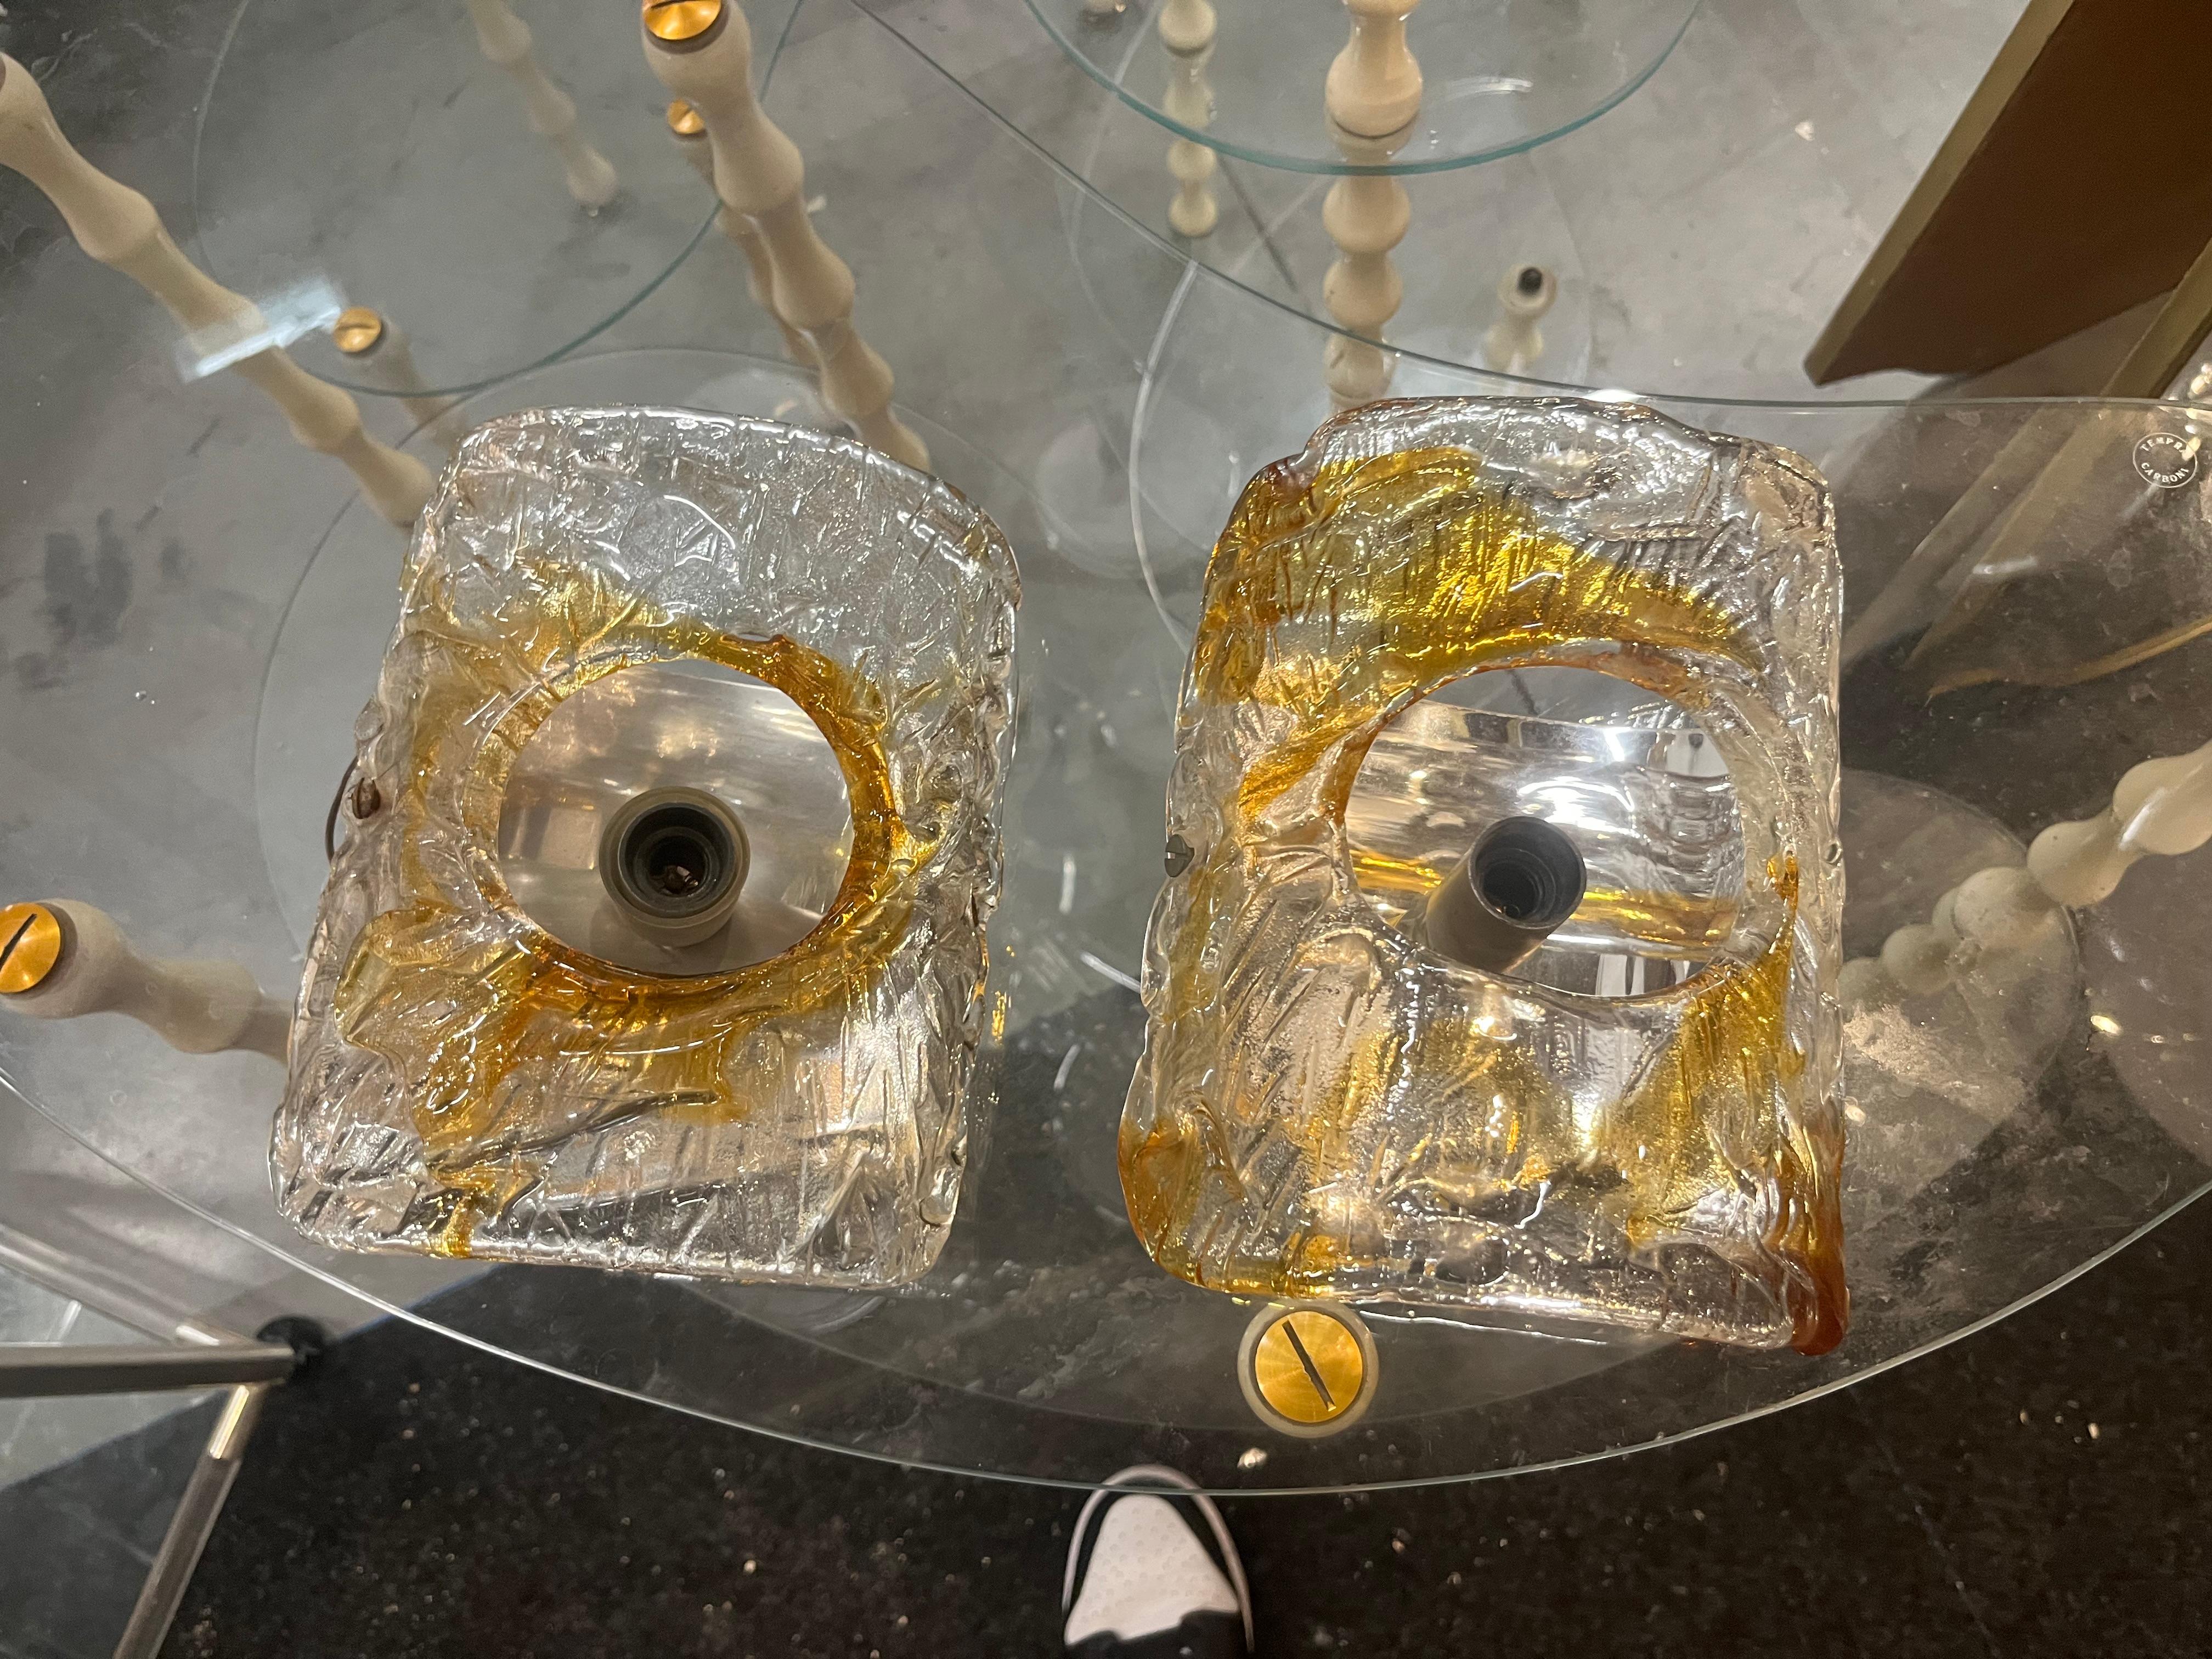 Pair of 50s/60s Murano glass wall sconces in the style of Mazzega
in excellent condition, showing no defects or chipping.
Measures:
Length 18 cm
Width  14 Cms